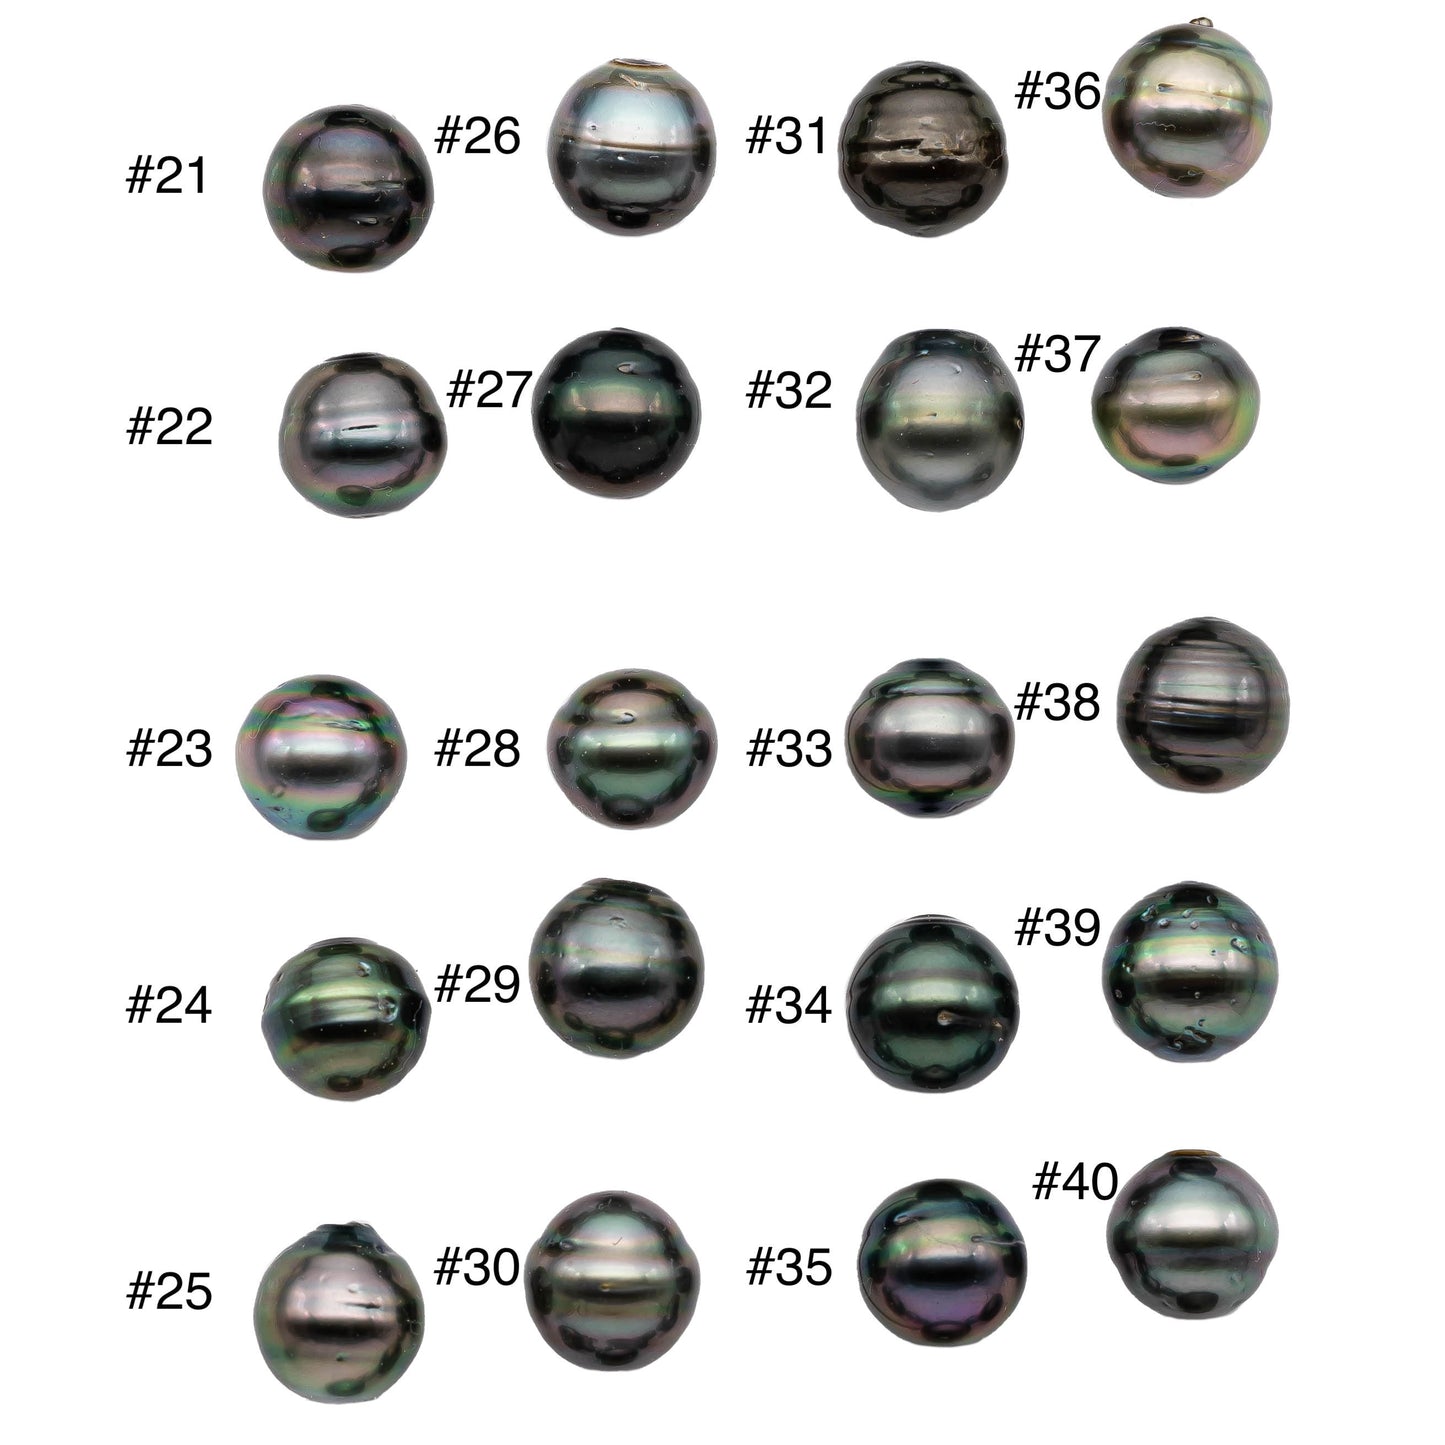 Single Loose Near Round Tahitian Pearl Undrilled Peacock Black Pearl with High Luster For Jewelry Making and No Hole, 11-11.5mm,  # 1122TH